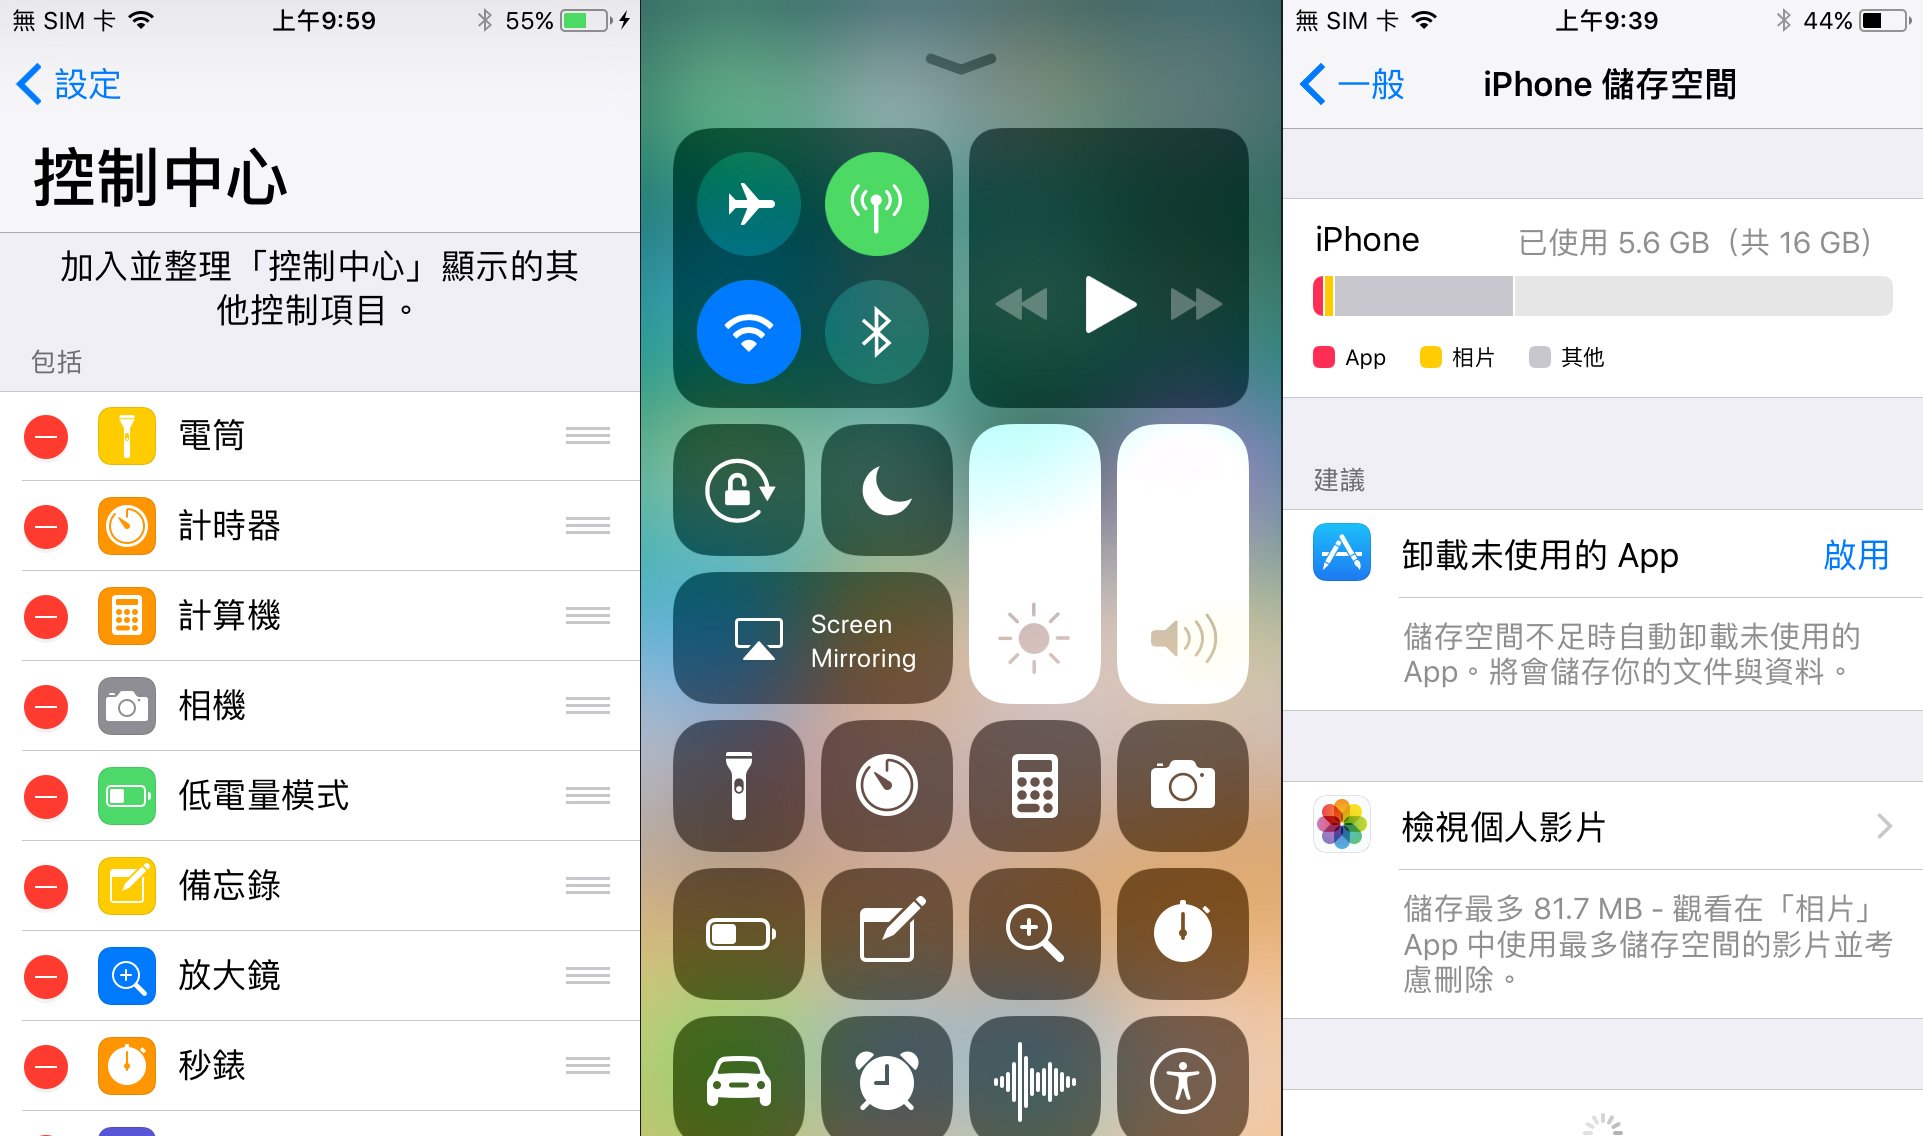 ios 11 installed into iphone 5s within 5 days 01